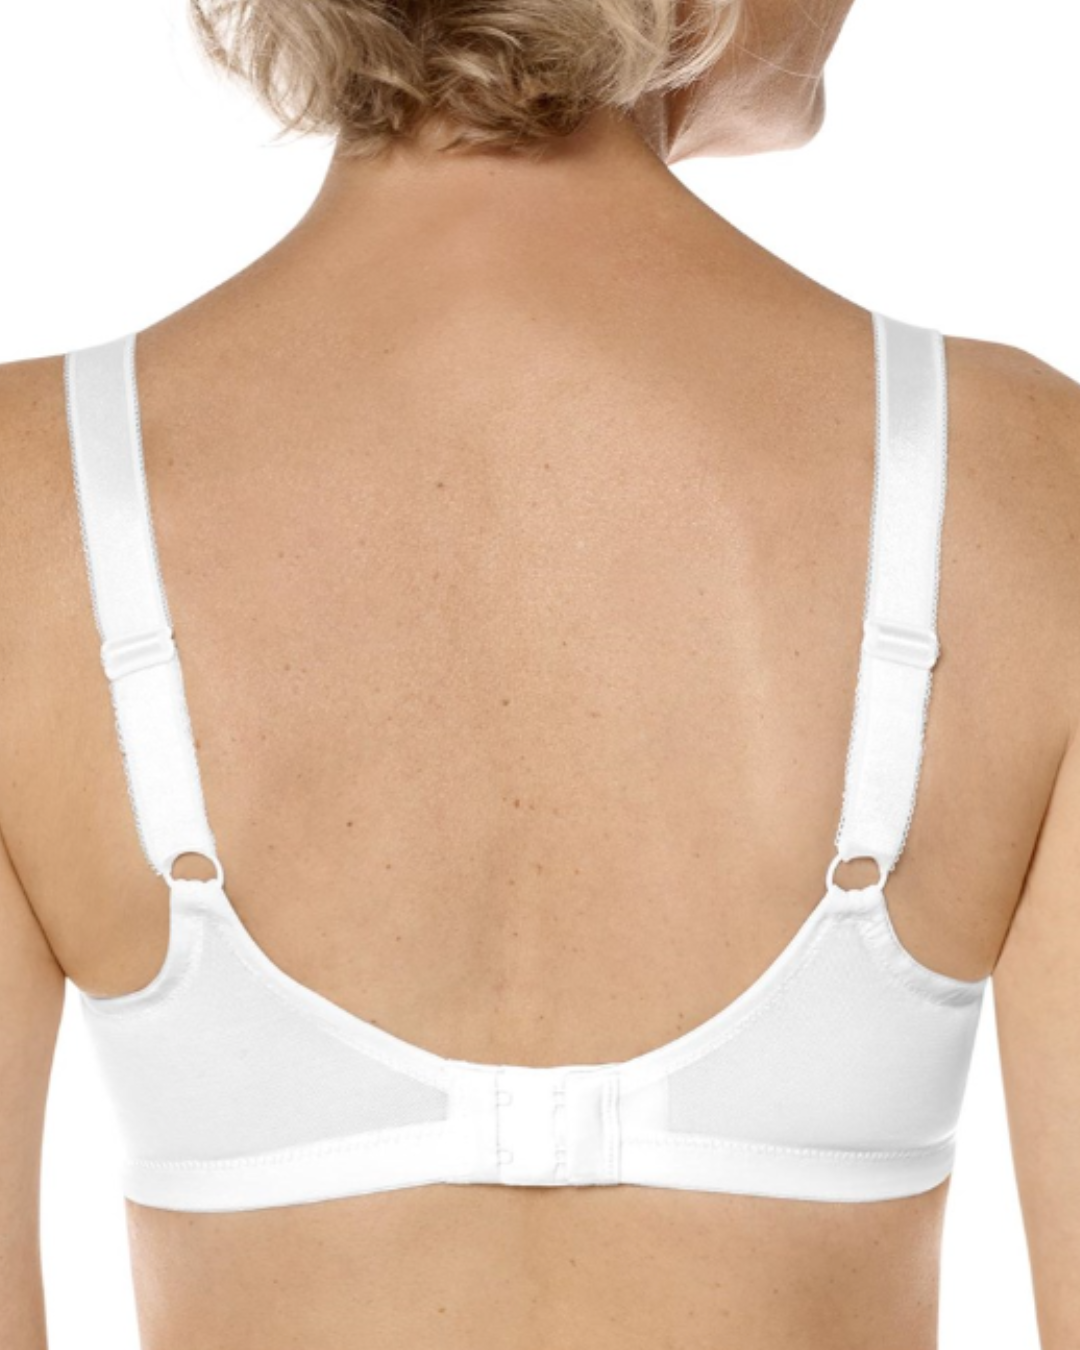 Amoena Rita Bra - Pocketed, non-wired bra offering firm control and support for post-breast surgery.